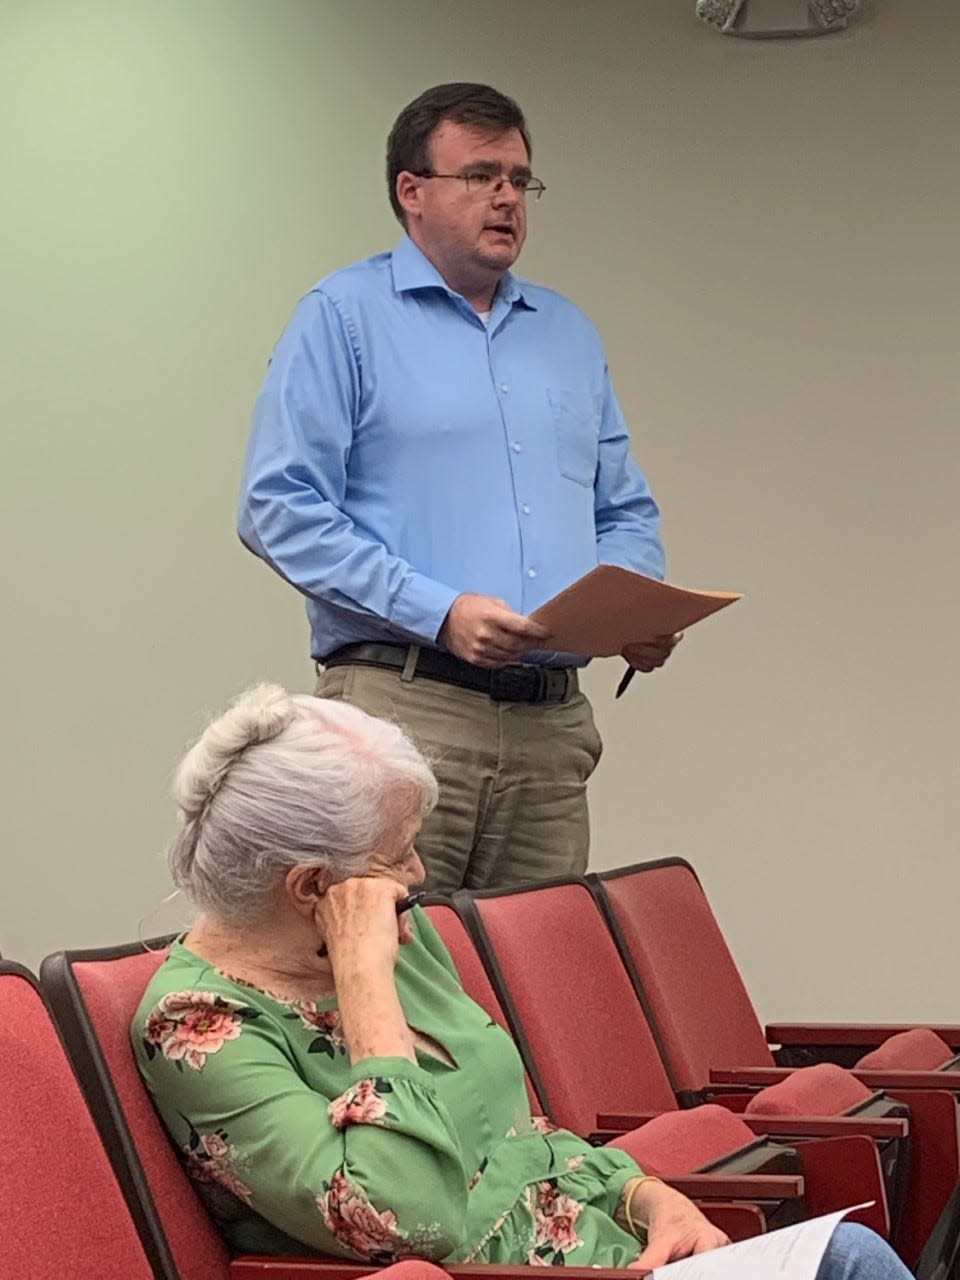 "The people of Madison County, that were on these boards, have been shut out of this," Marshall Town Administrator and economic development board member Forrest Gilliam said of the 2030 County Comprehensive Plan draft process.